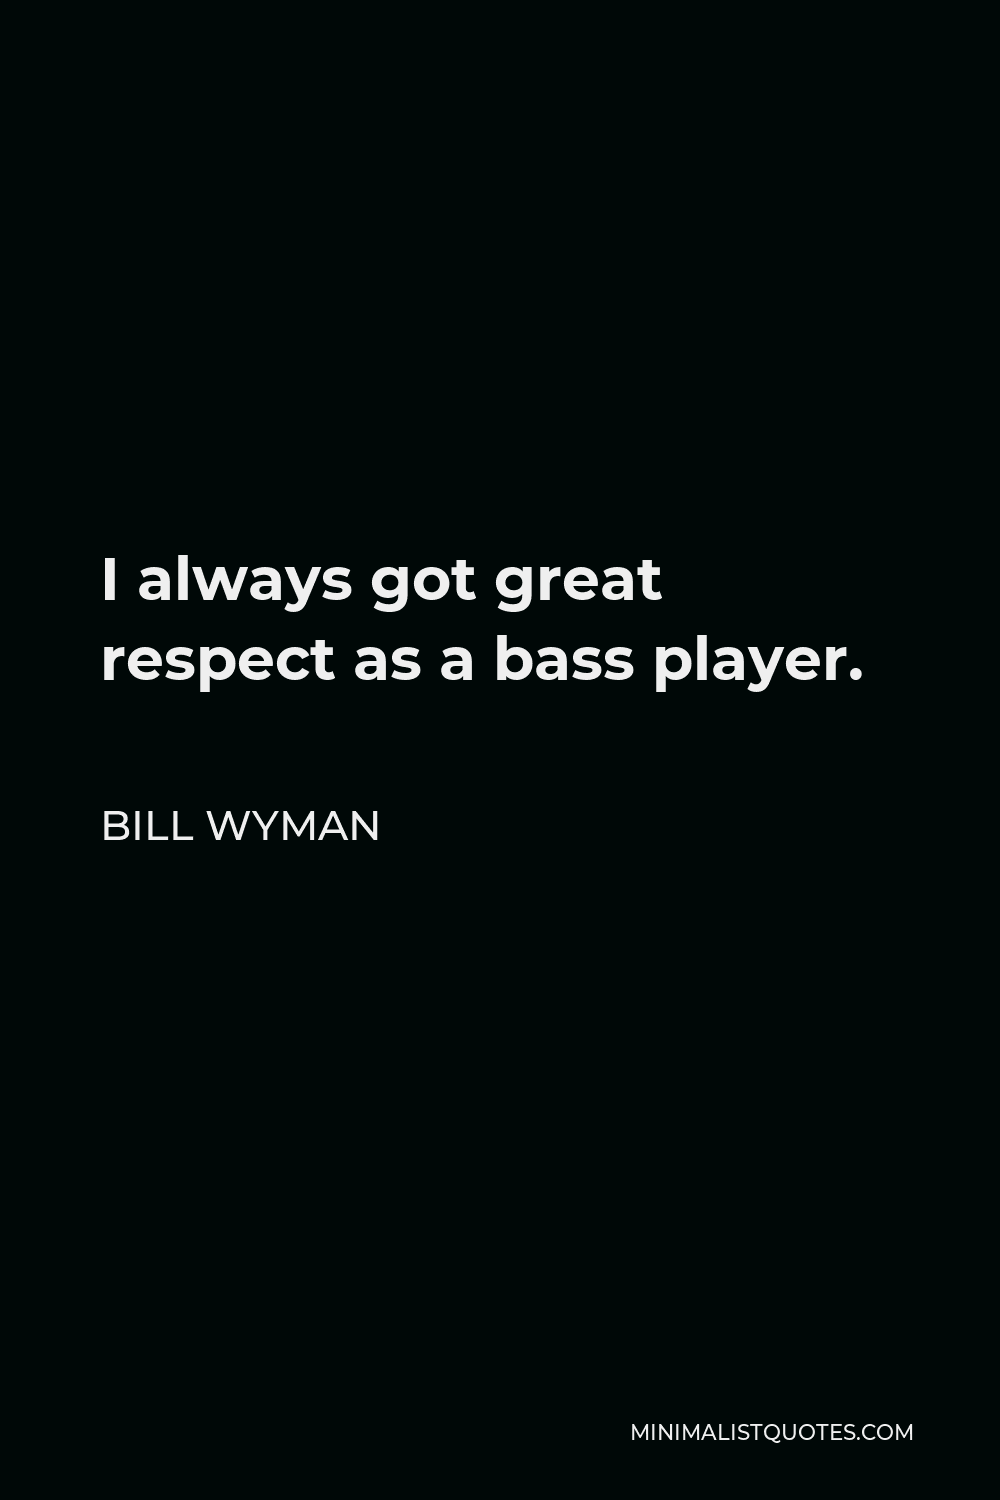 Bill Wyman Quote - I always got great respect as a bass player.